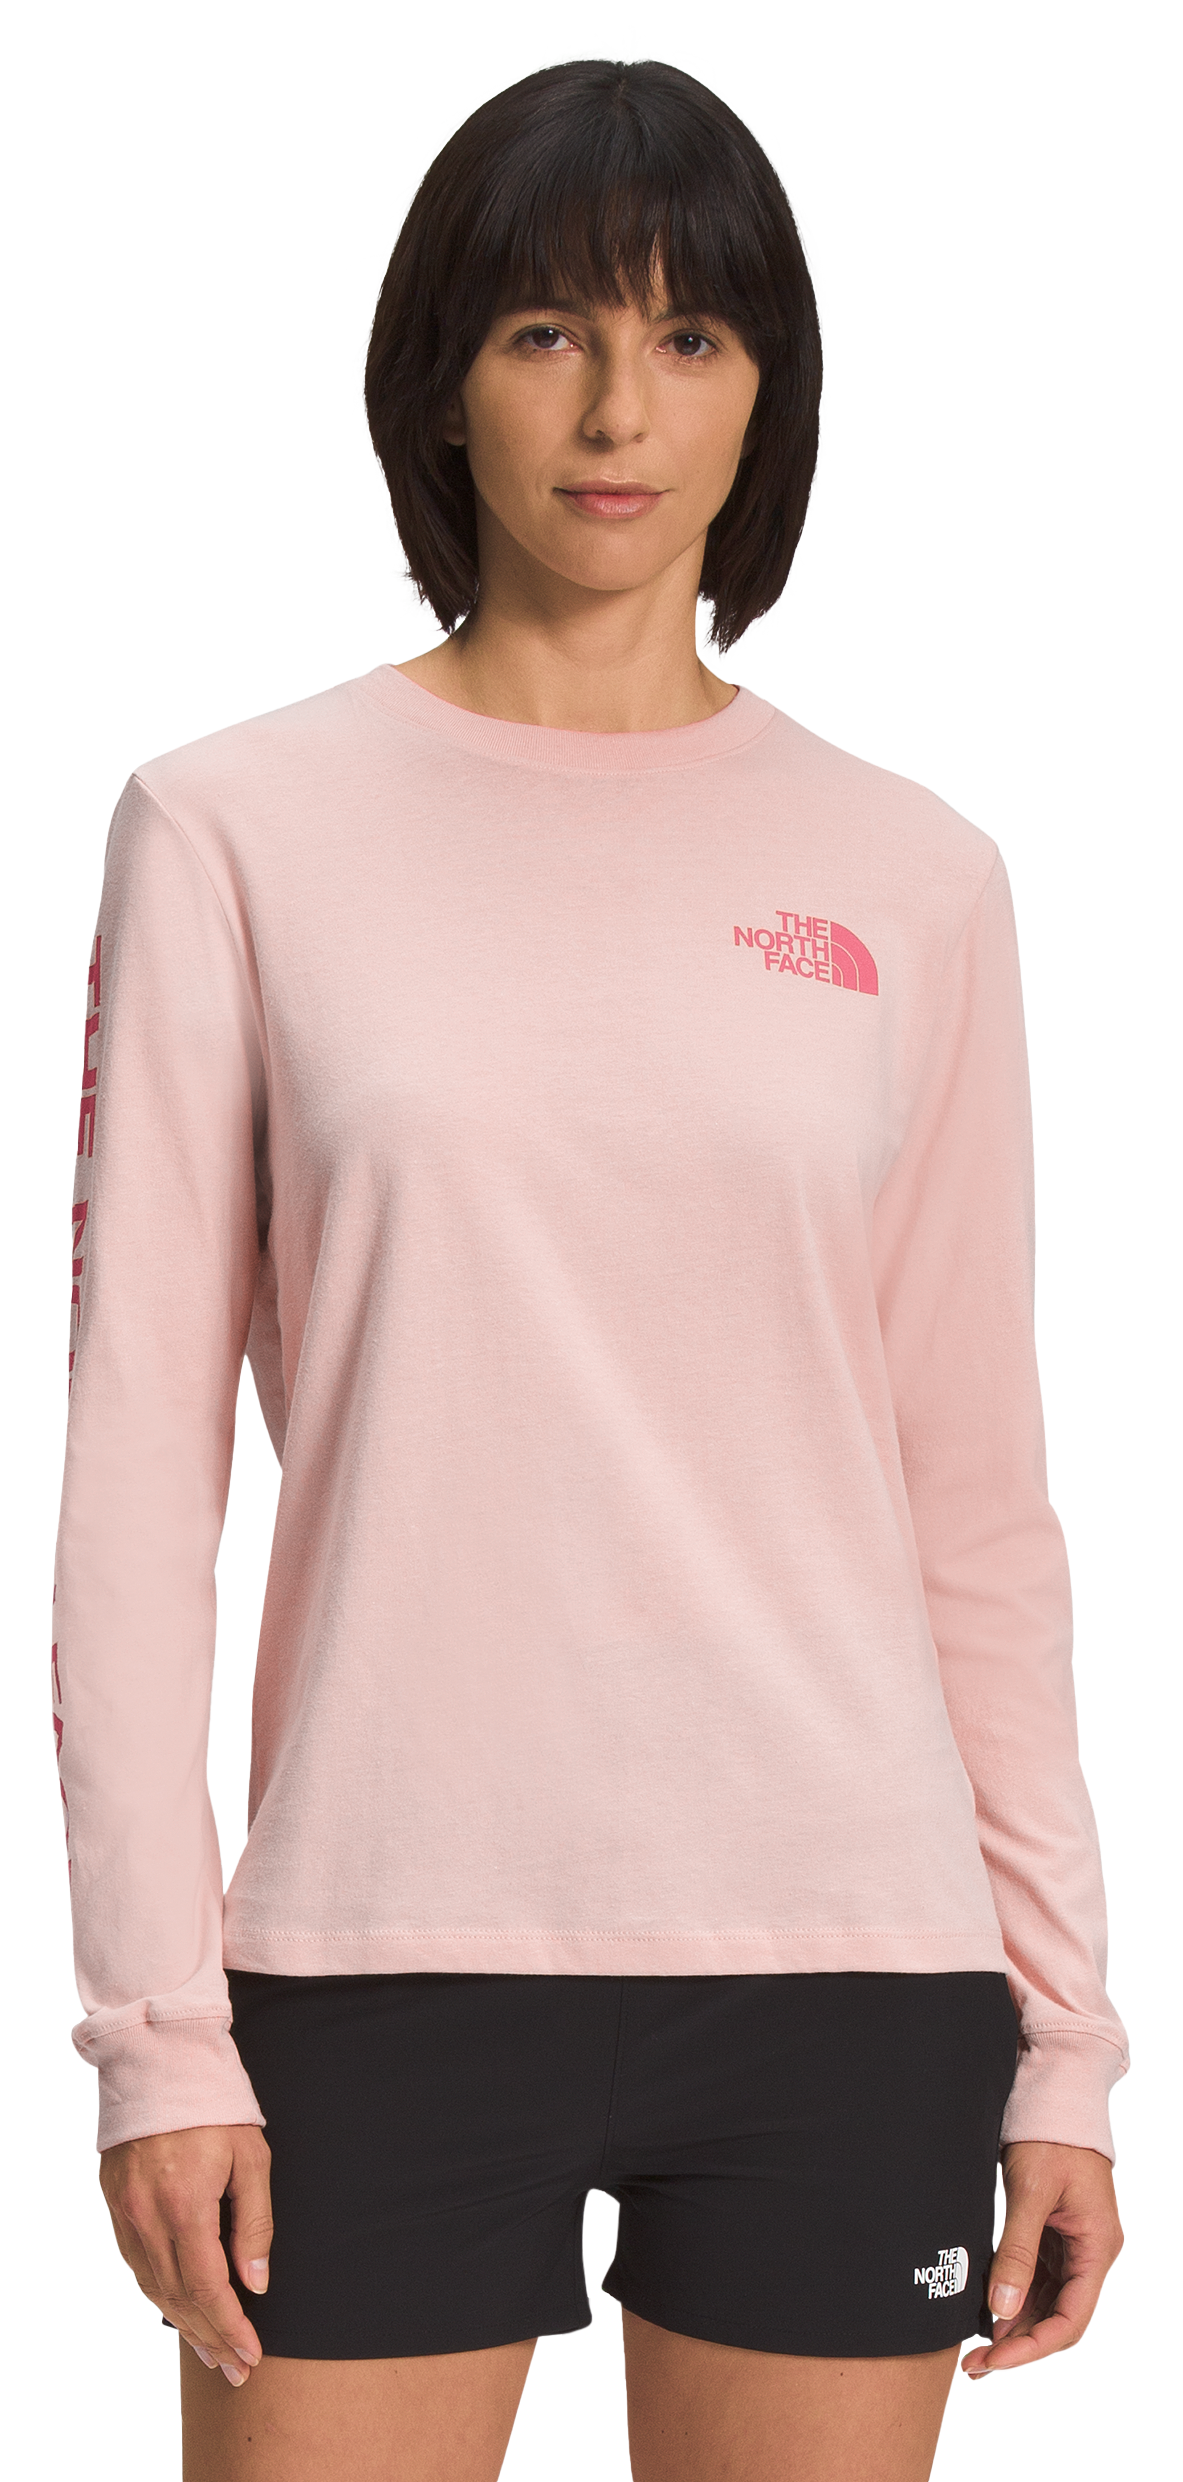 The North Face Hit Graphic Long-Sleeve T-Shirt for Ladies - Pink Moss/Cosmo Pink - XL